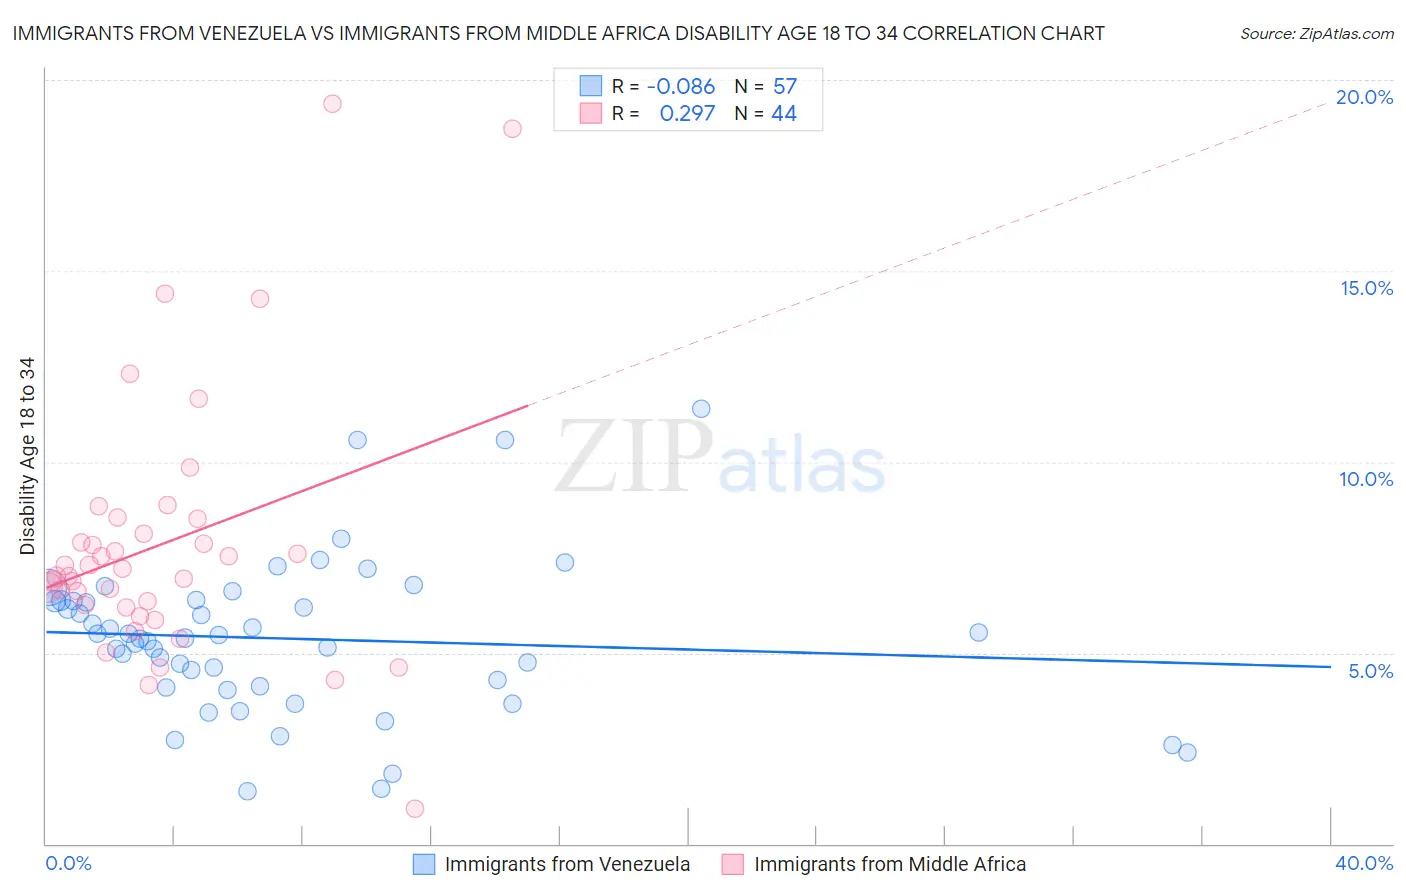 Immigrants from Venezuela vs Immigrants from Middle Africa Disability Age 18 to 34